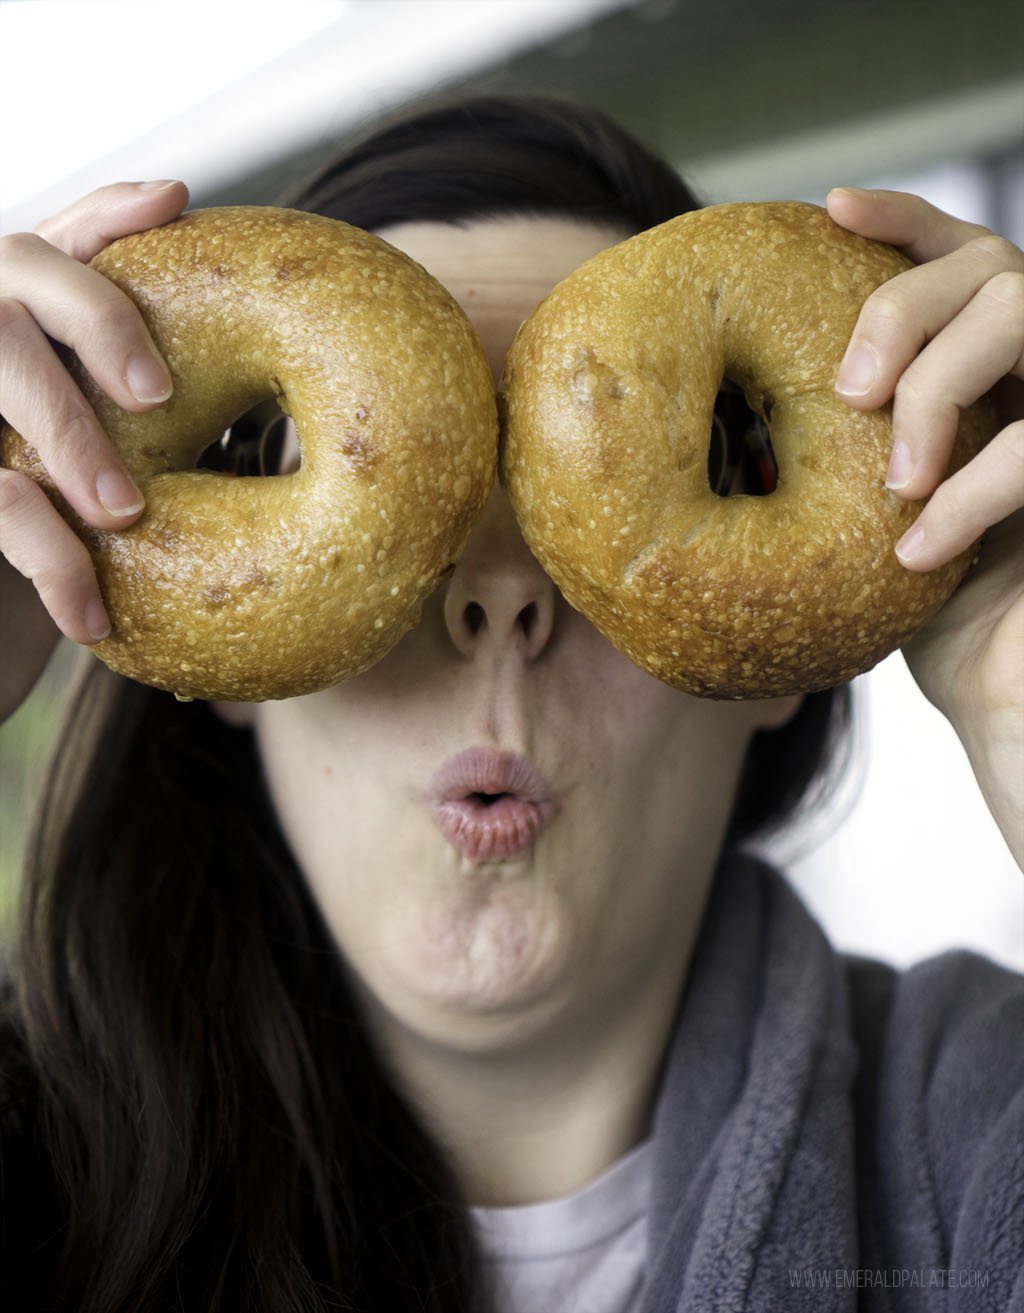 woman being silly holding two bagels over her eyes